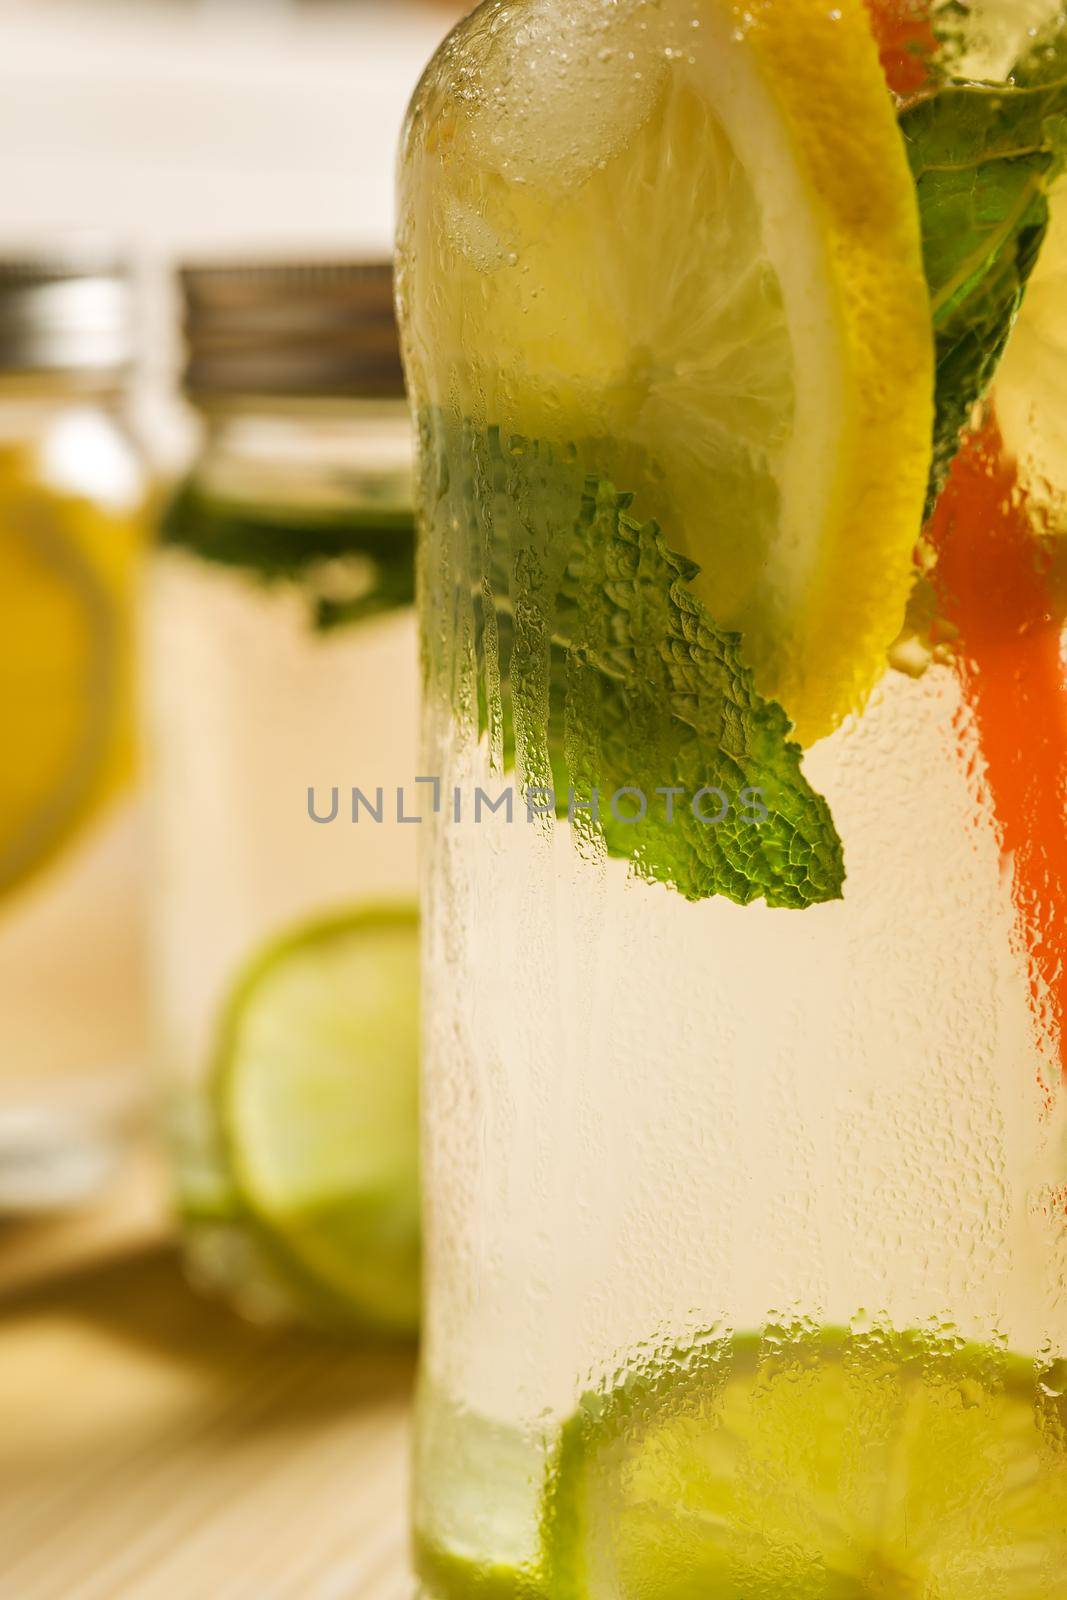 vertical close-up of a glass jar with ice water, lemon, lime and mint leaves, it is on a wooden table and illuminated by sunlight, in the background and out of focus are other lemonades